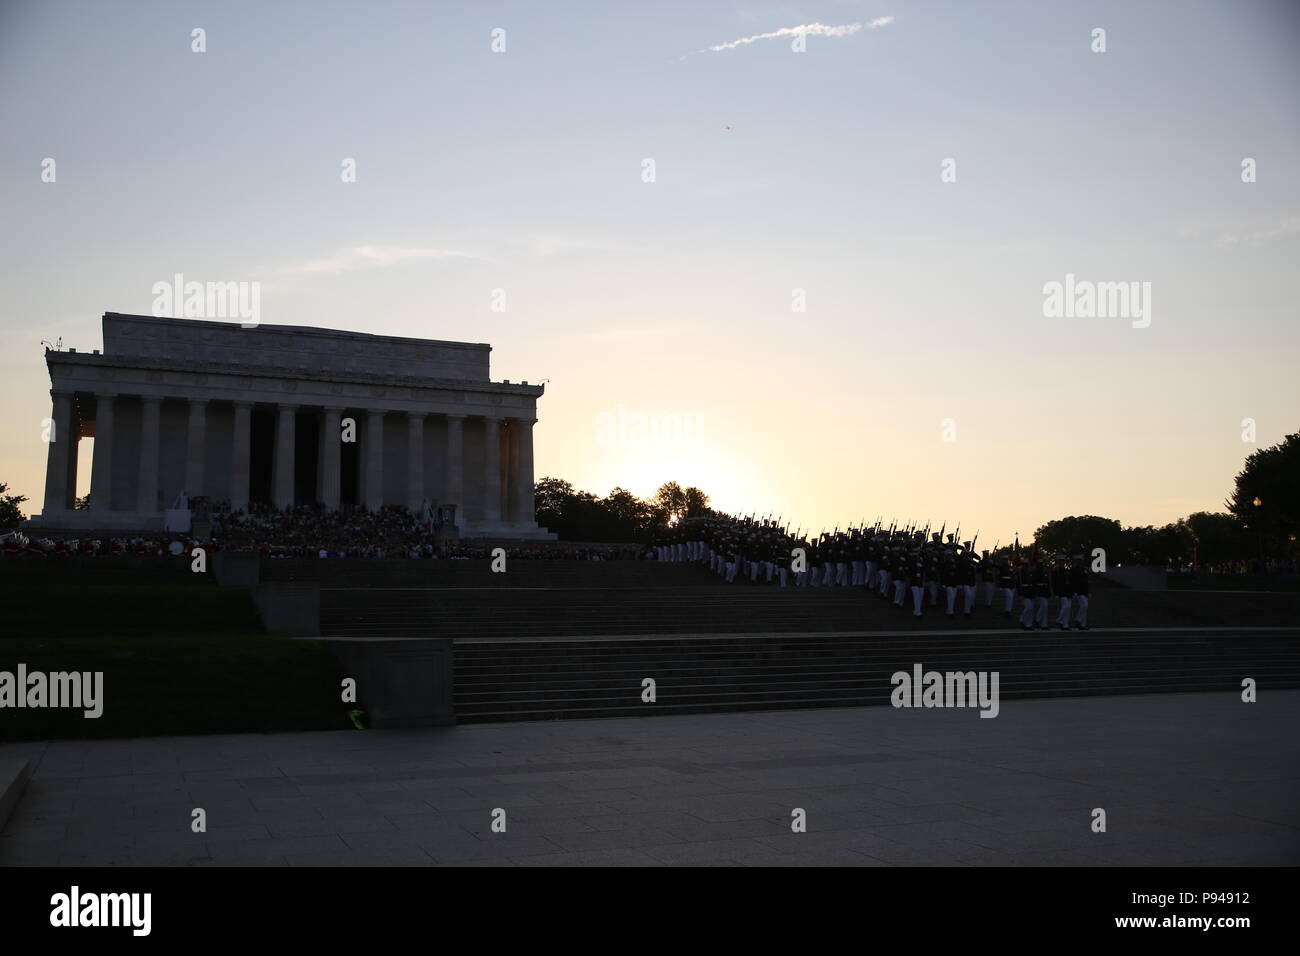 Alpha and Bravo marching companies with Marine Barracks Washington D.C., march off the parade deck at the conclusion of a Tuesday Sunset Parade at the Lincoln Memorial, Washington D.C., July 10, 2018. The guest of honor for the parade was the former Vice President of the U.S., Joe Biden, and the hosting official was the Staff Judge Advocate to the Commandant of the Marine Corps, Maj. Gen. John R. Ewers Jr. (Official Marine Corps photo by Cpl. Damon Mclean/Released) Stock Photo